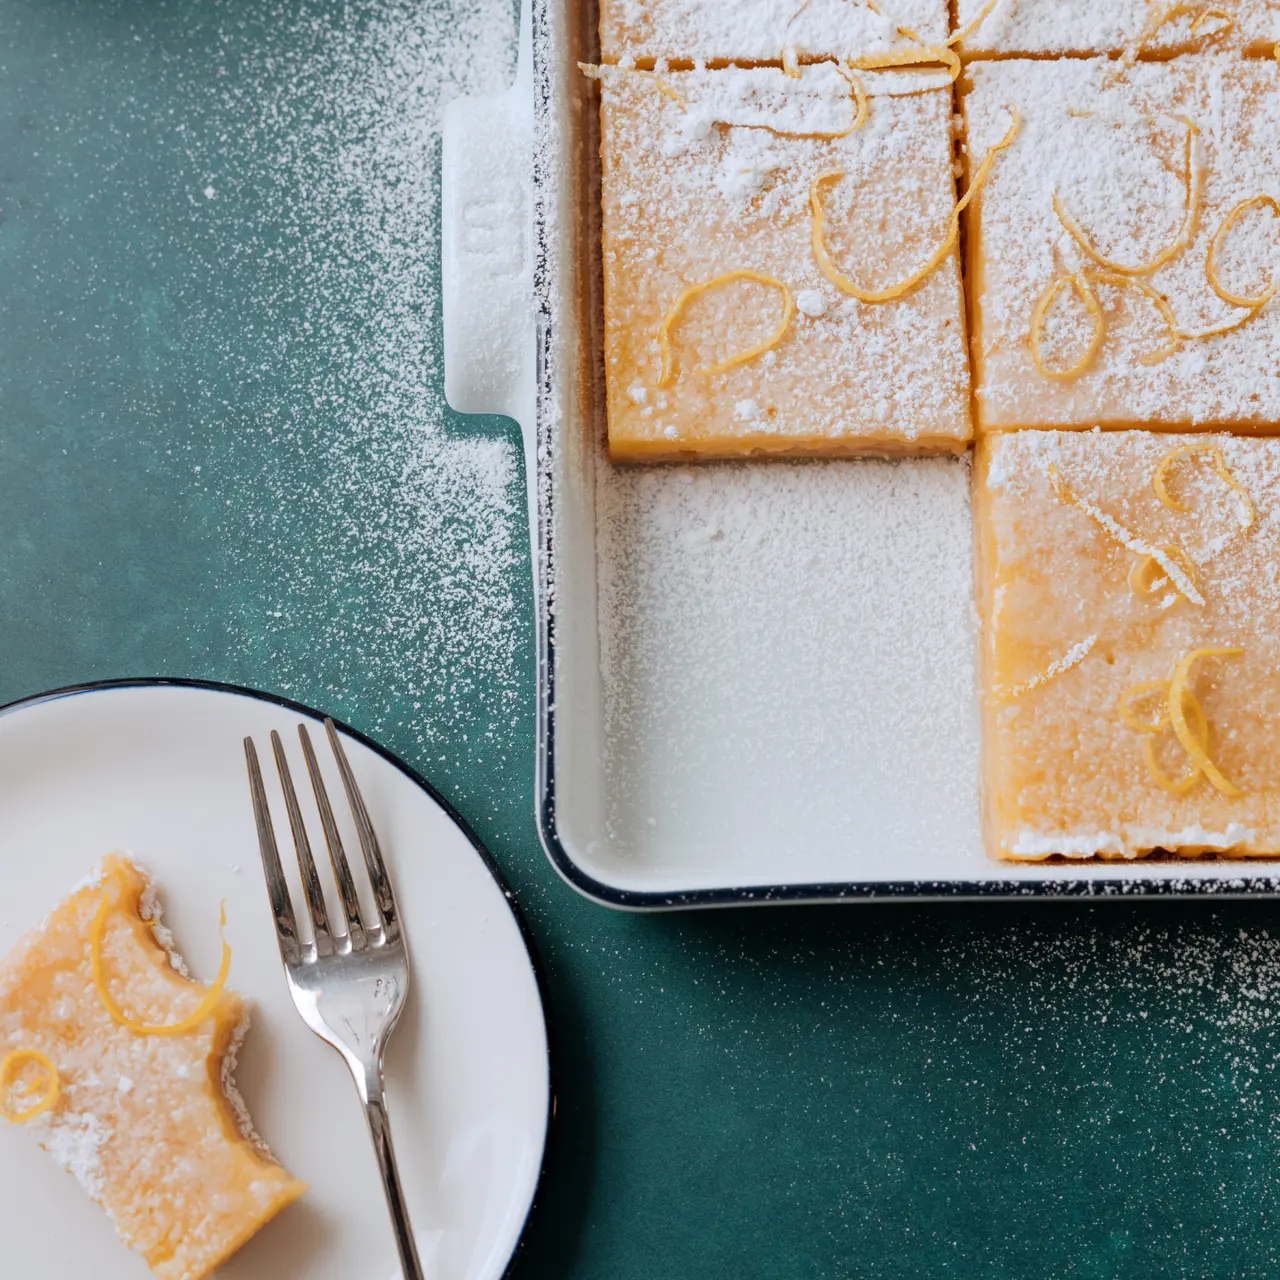 A dusting of powdered sugar tops lemon bars in a baking dish next to a plate with a single bar and a fork on a teal surface.